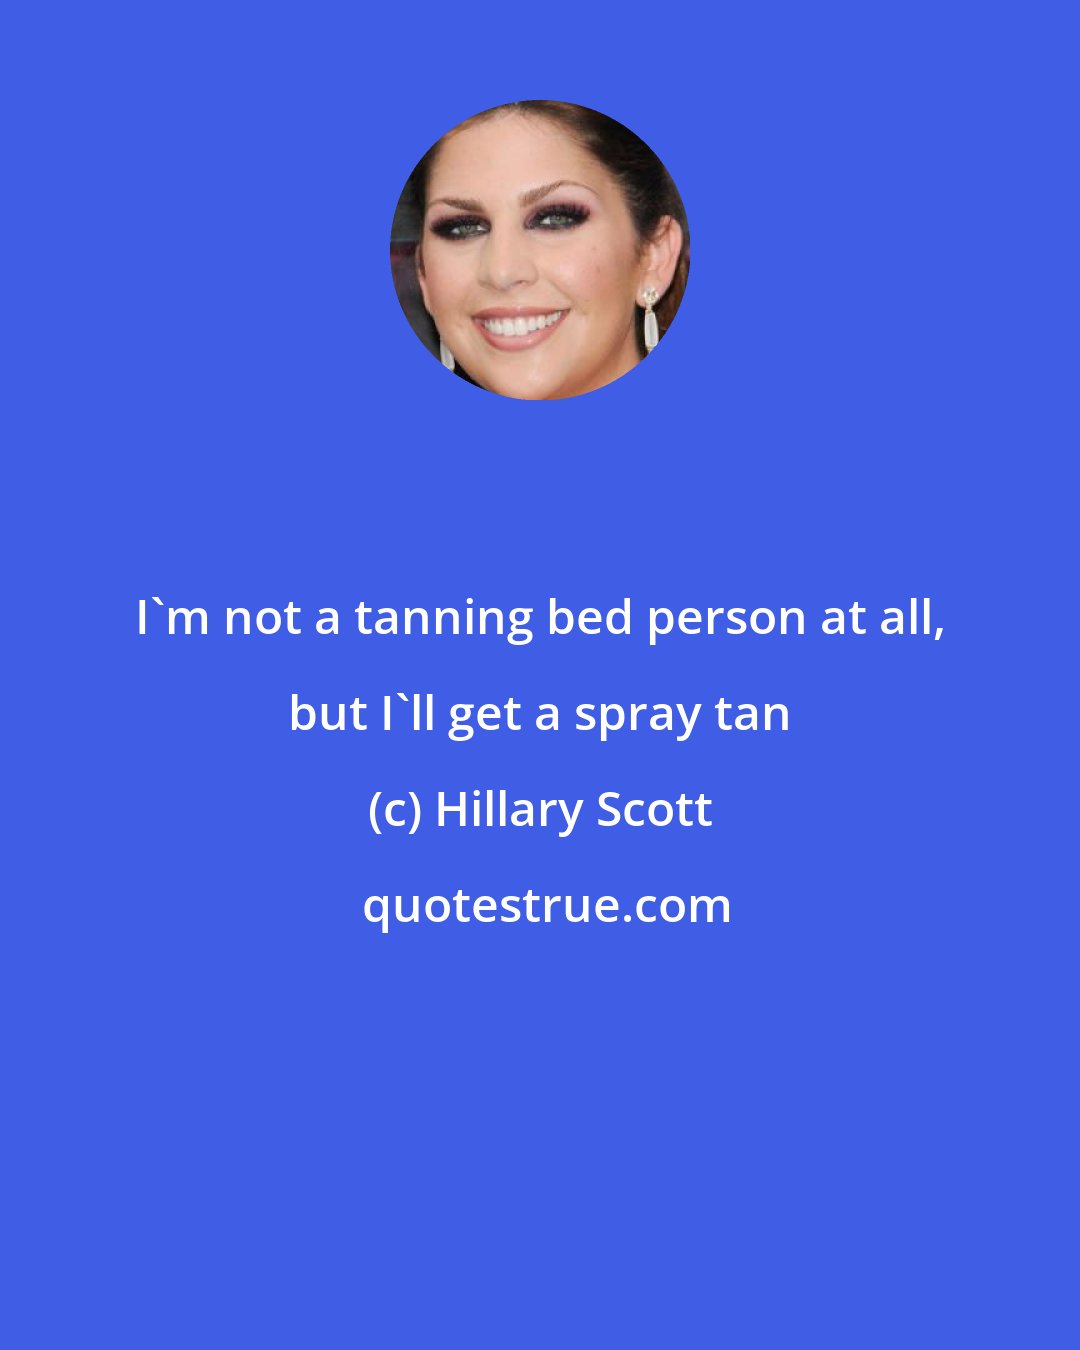 Hillary Scott: I'm not a tanning bed person at all, but I'll get a spray tan